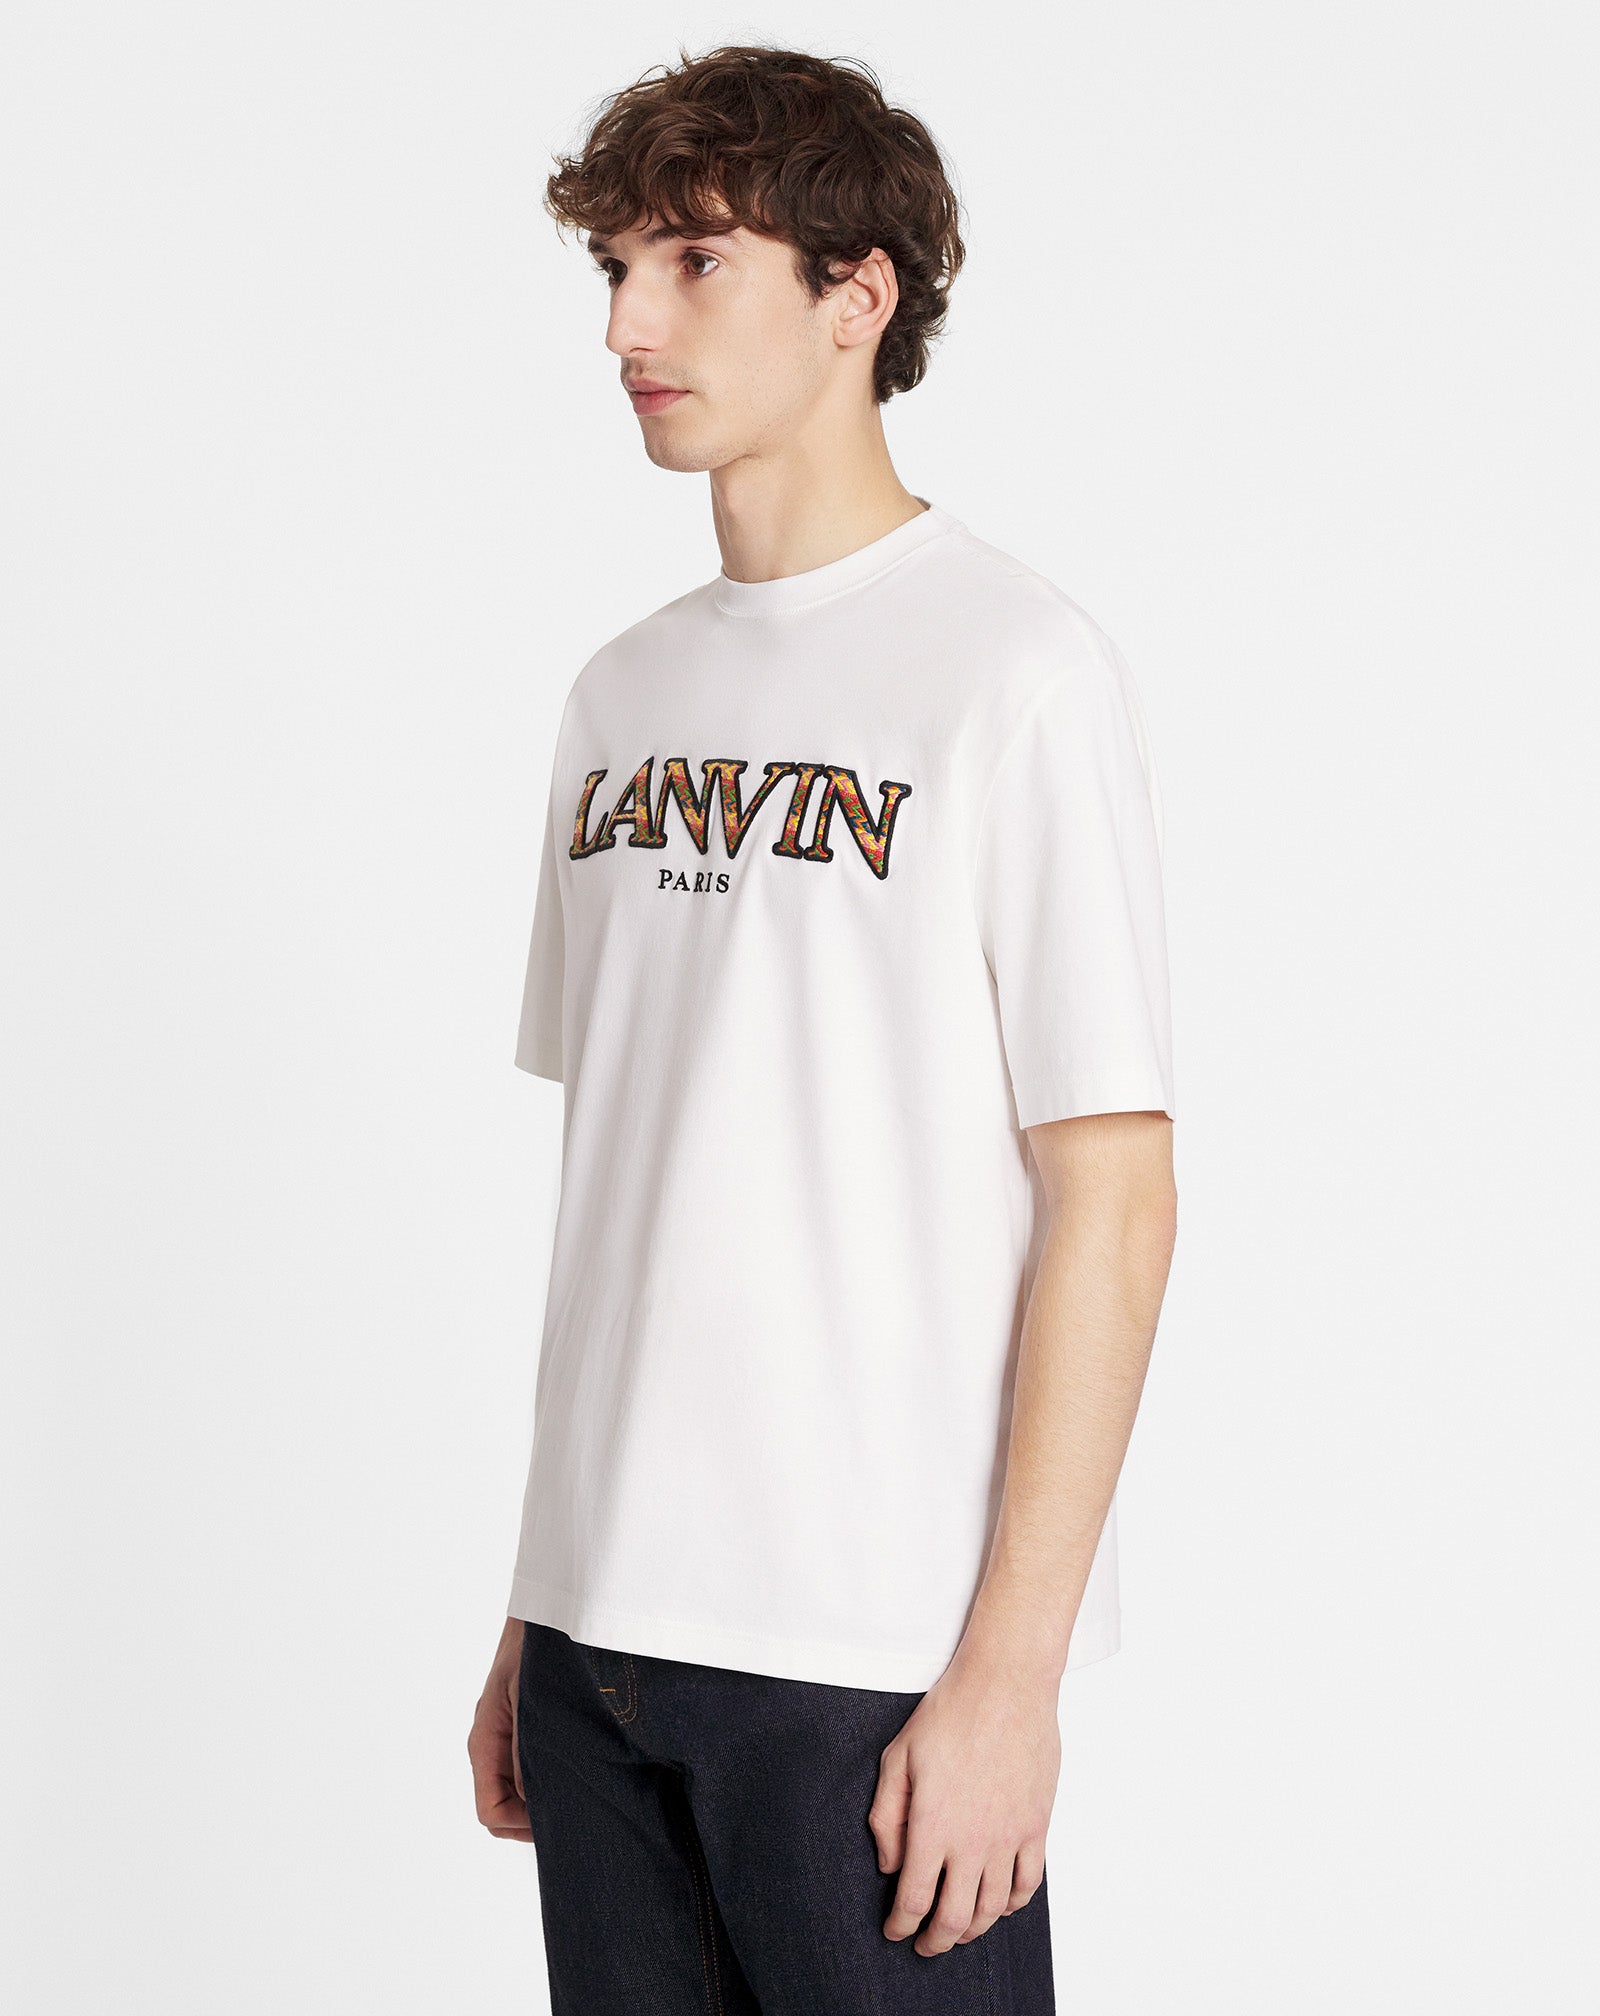 CLASSIC CURB EMBROIDERED T-SHIRT OPTICAL WHITE | Lanvin – LANVIN